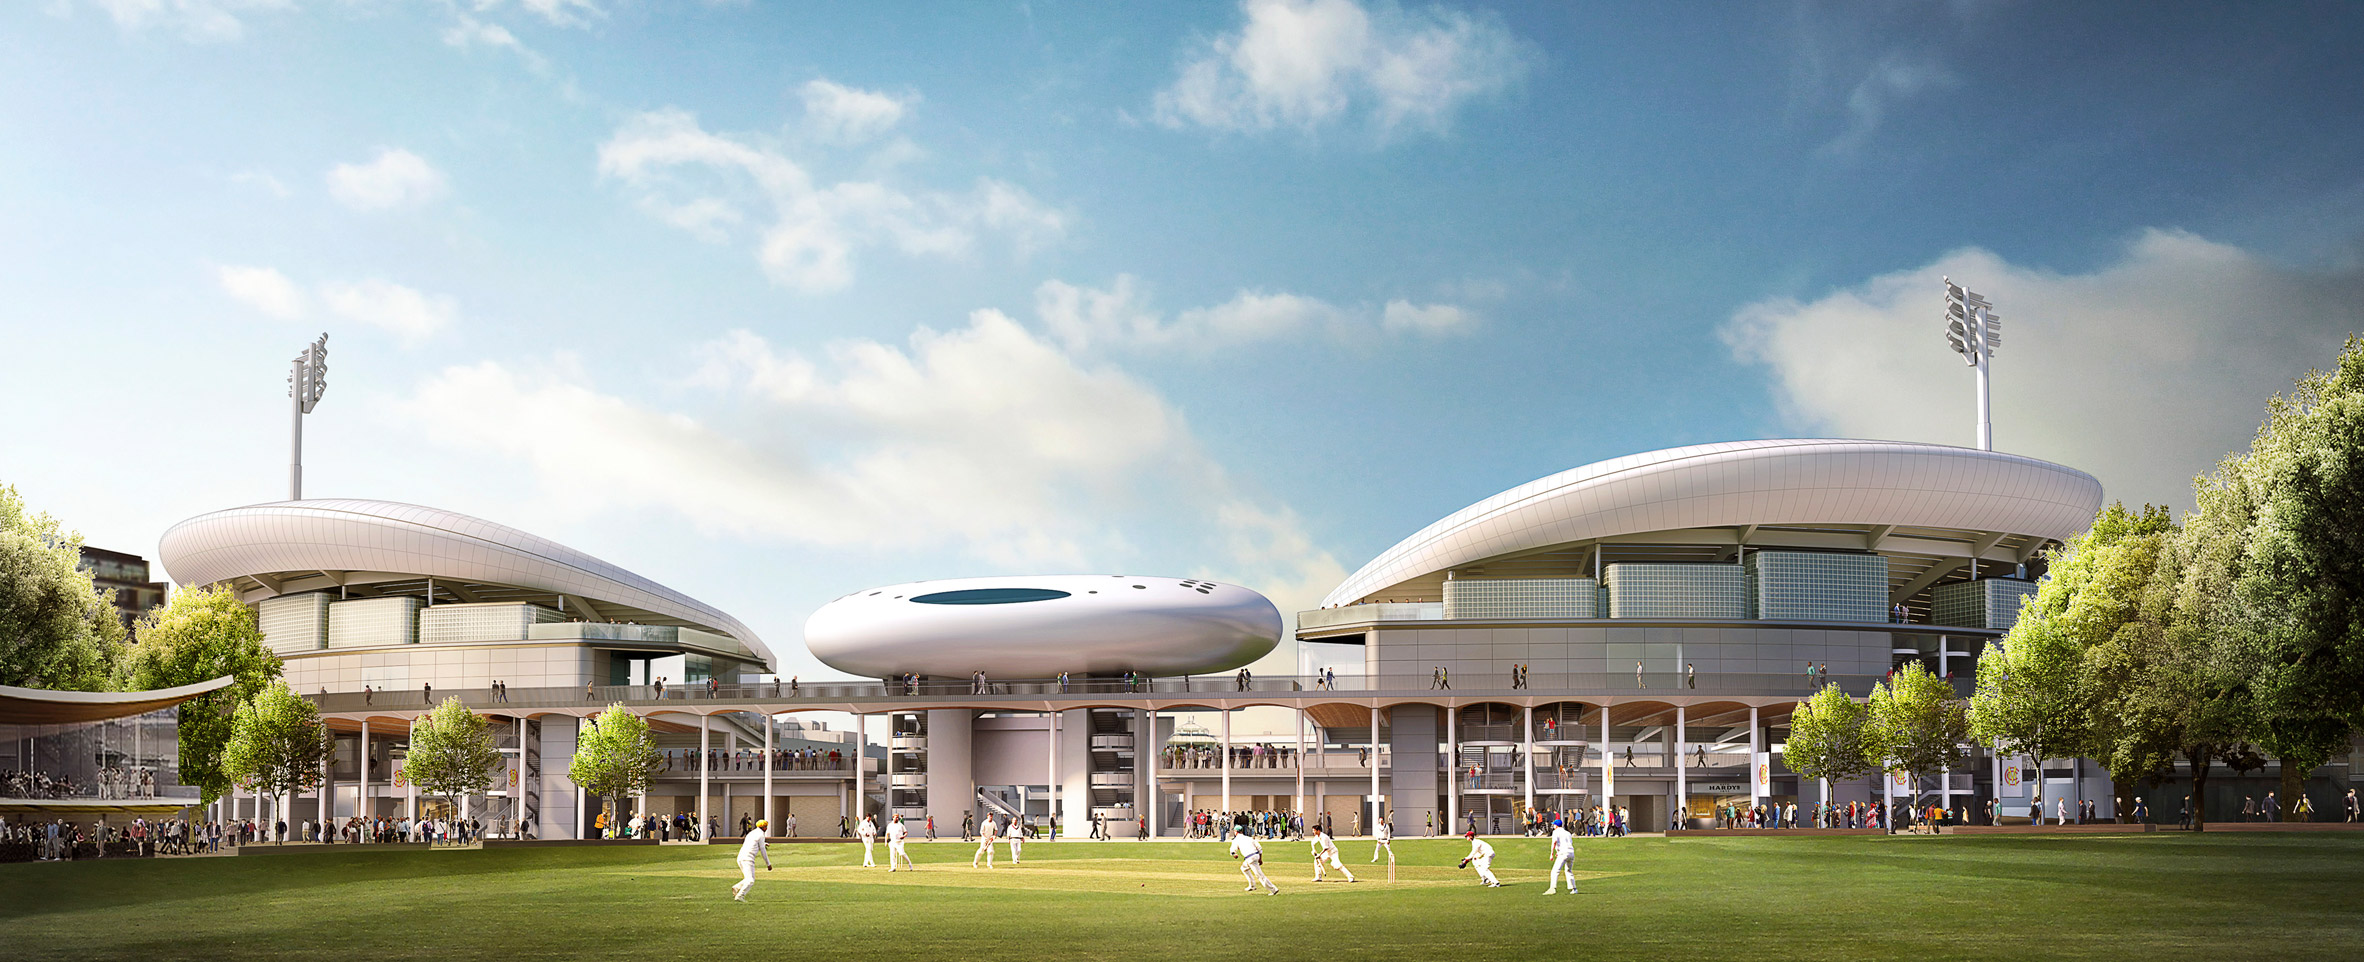 Lord's Cricket Ground Media Centre, London – Projects – ElliottWood